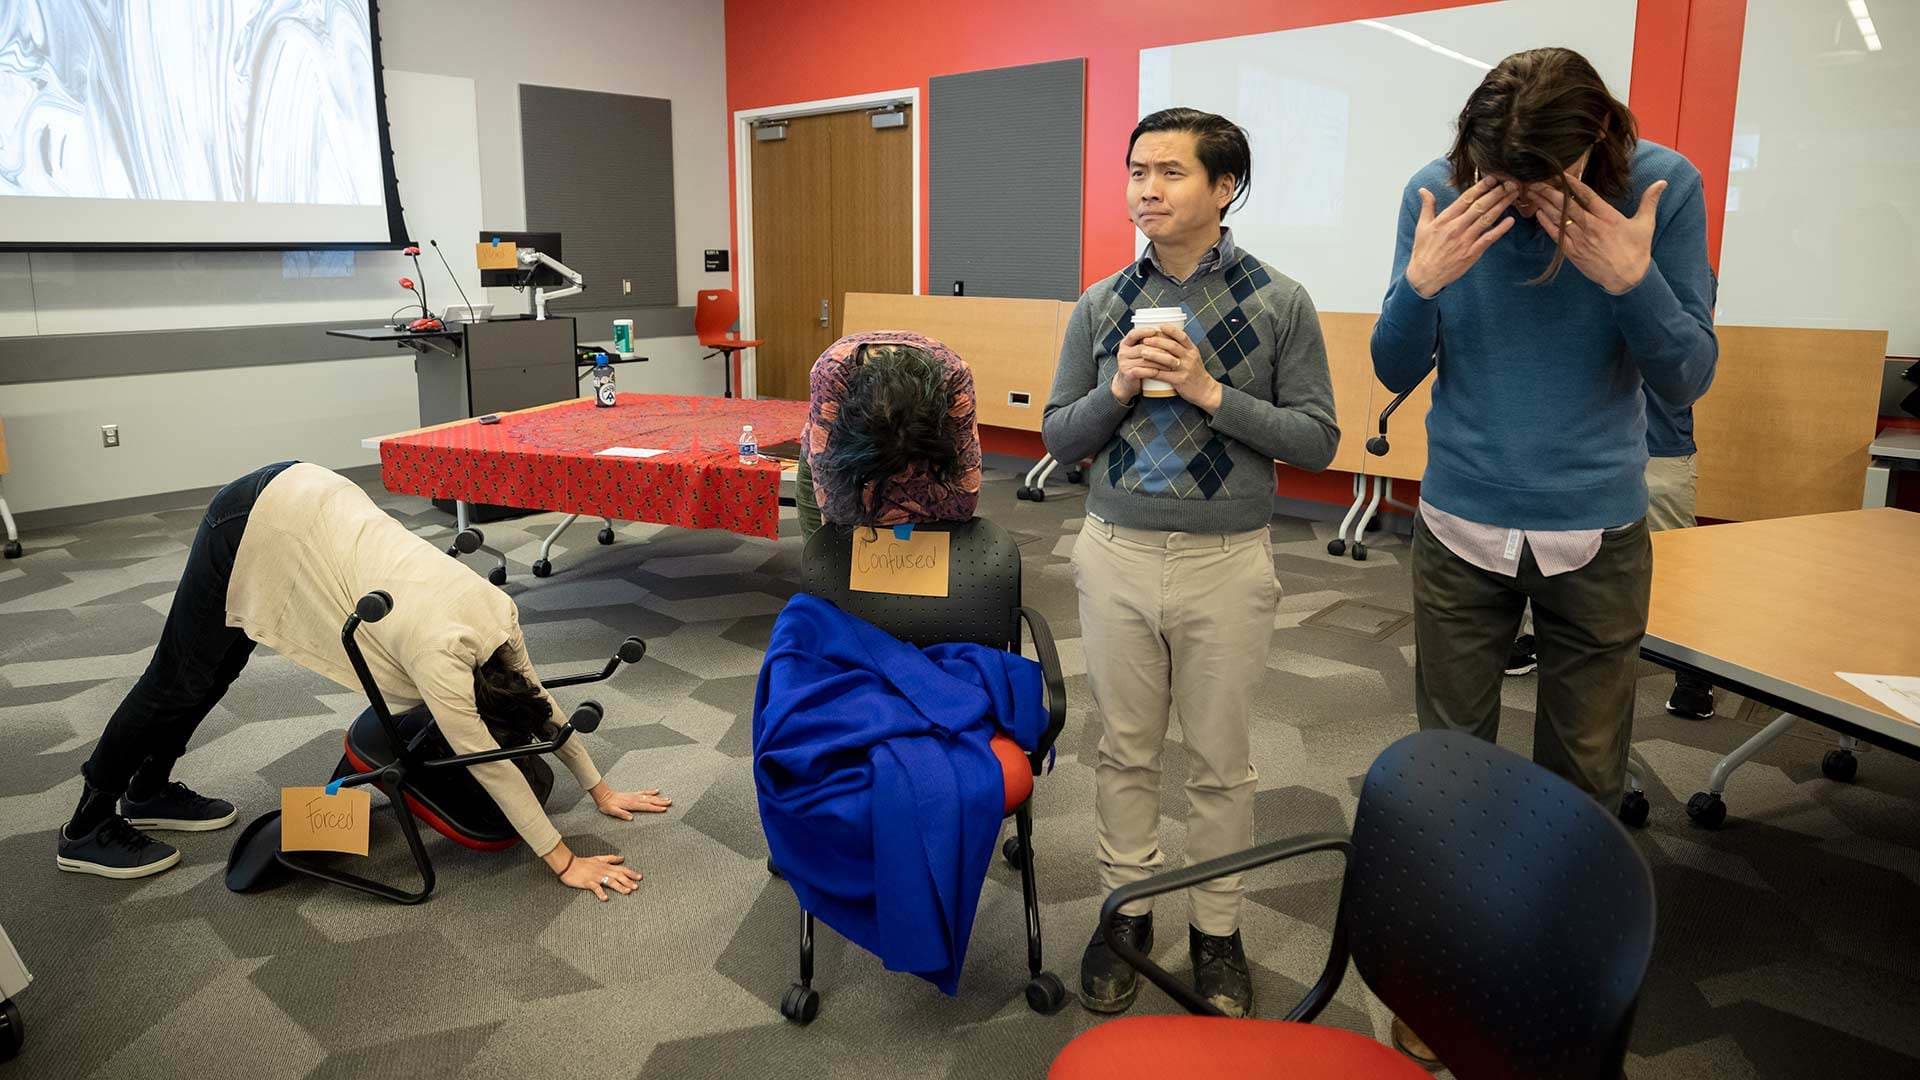 one faculty member bends over a chair with a sign that reads, "forced." Another leans with head down on chair with sign that reads, "confused." A third holds a coffee cup, while a fourth covers their eyes with their hands